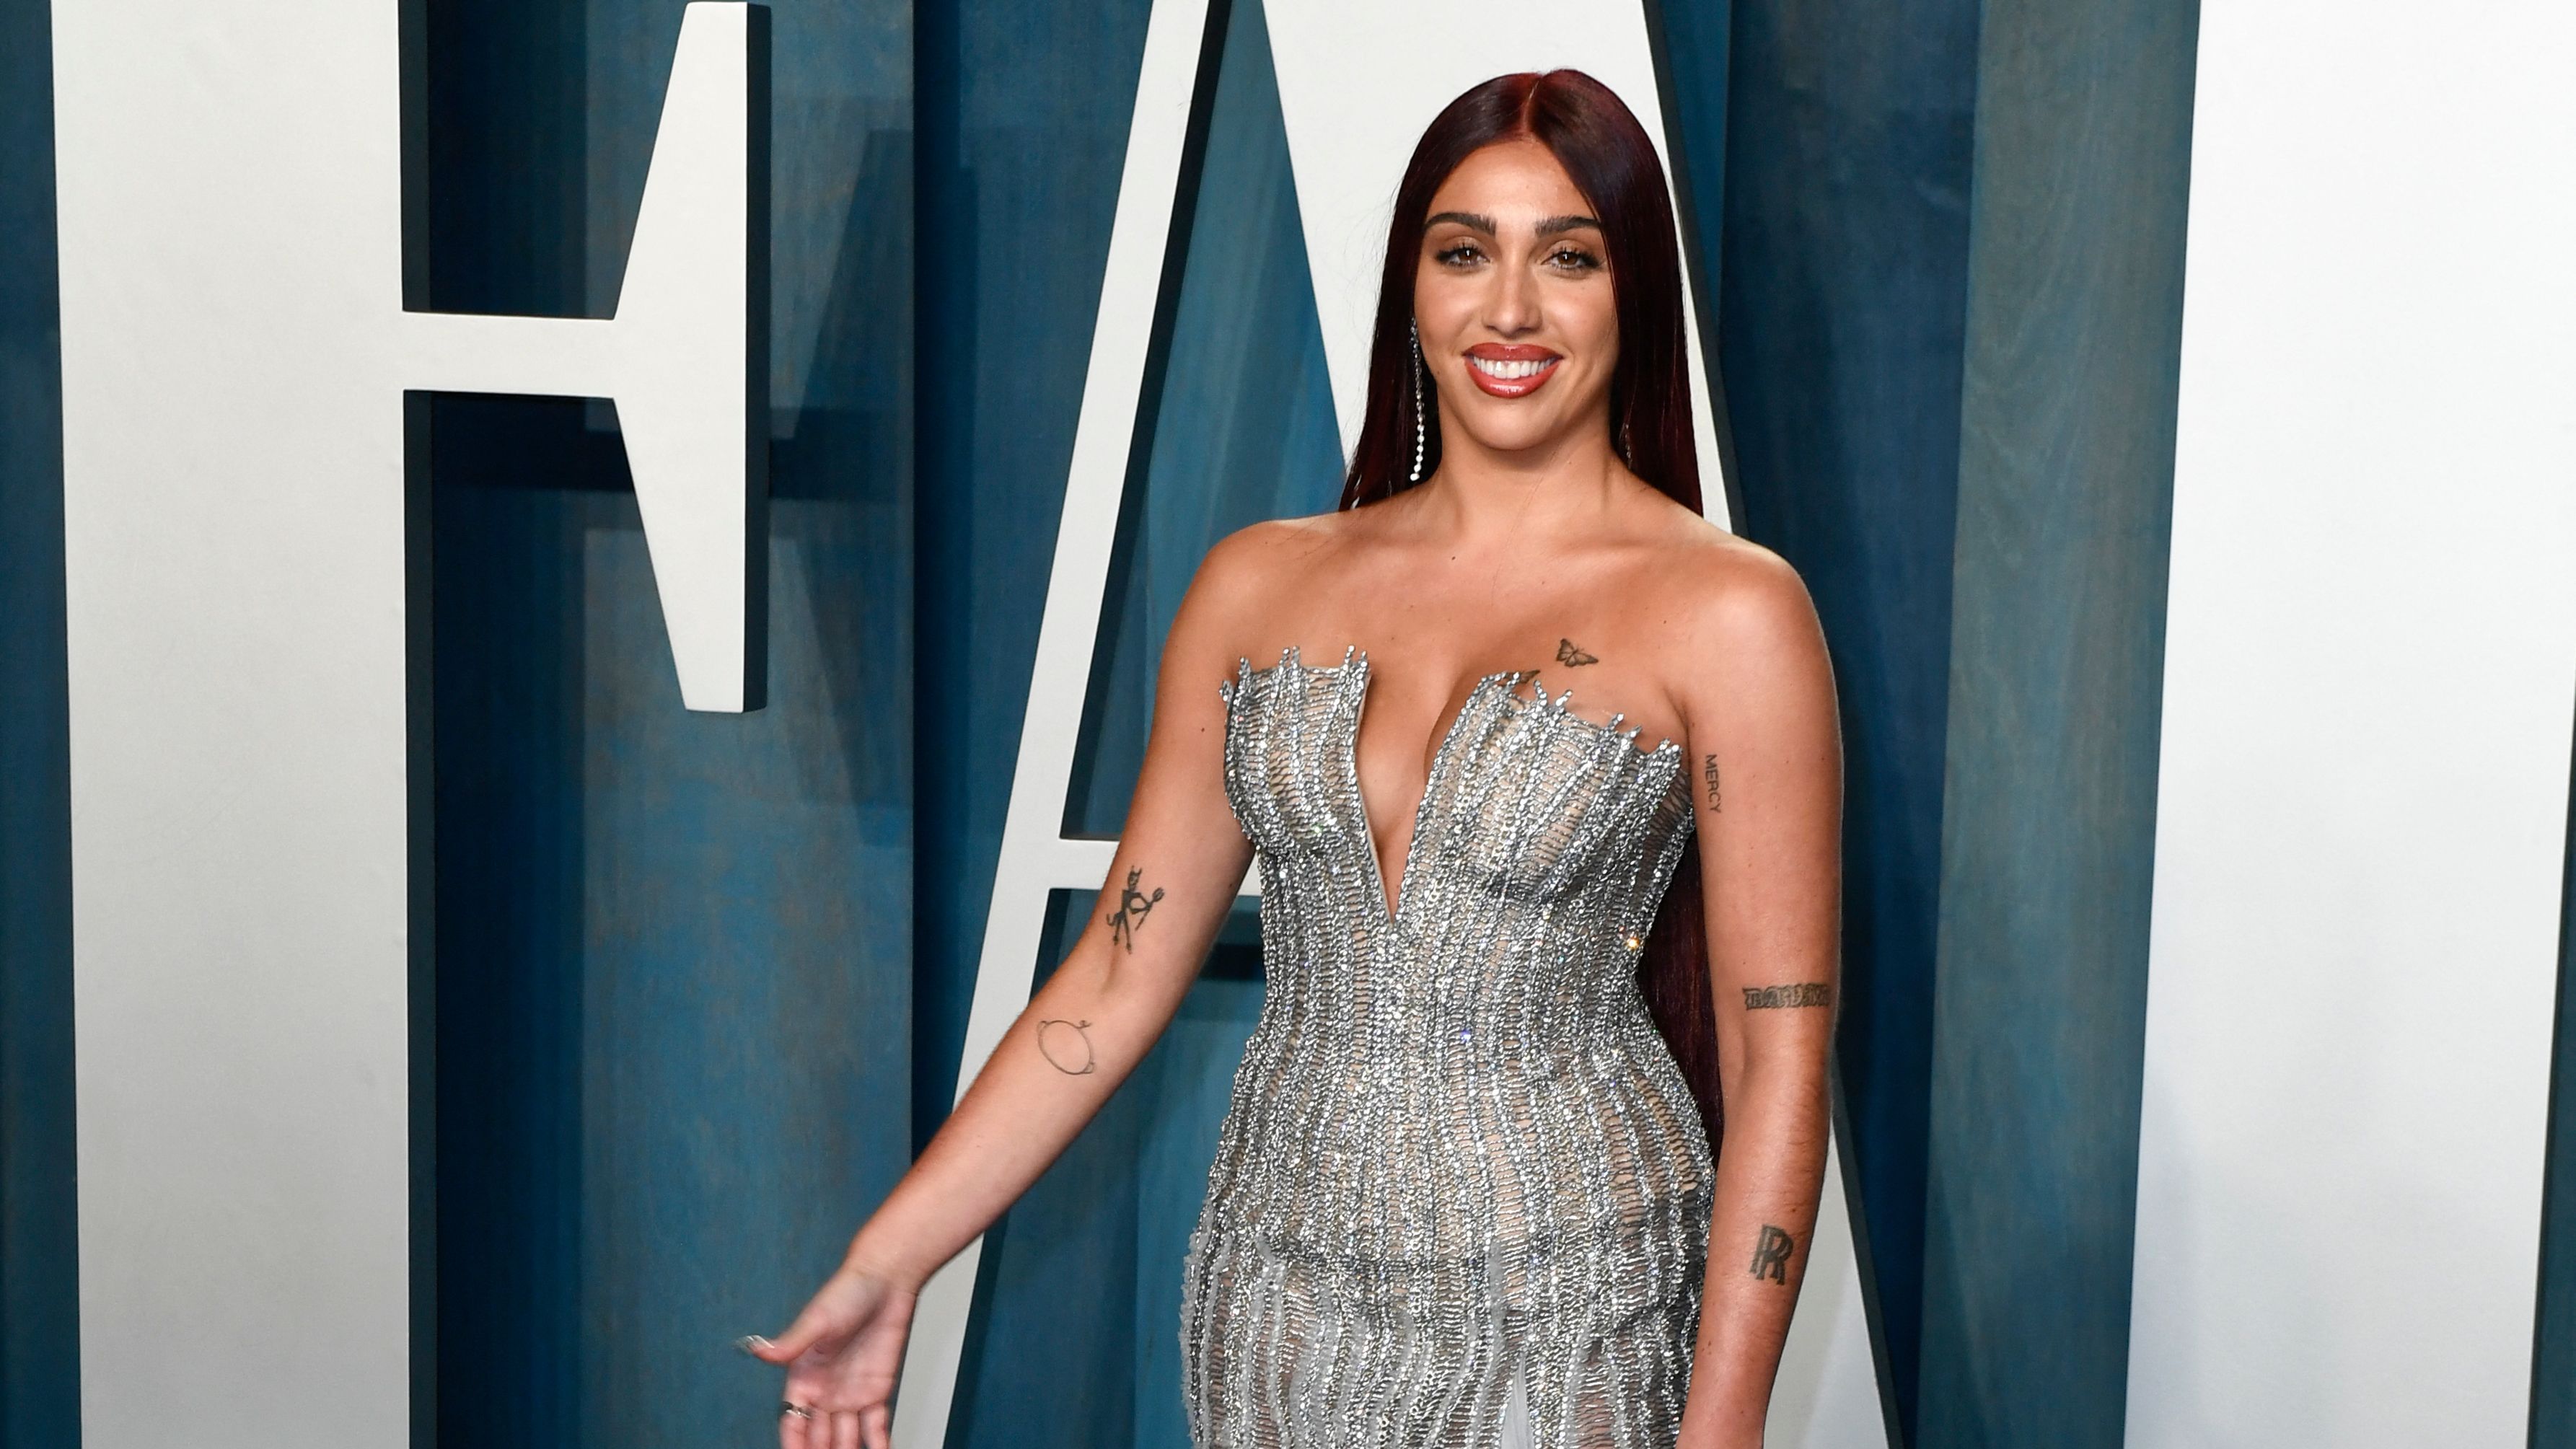 Lourdes Leon Has Epic Abs And Underboob In A Shredded Dress On IG